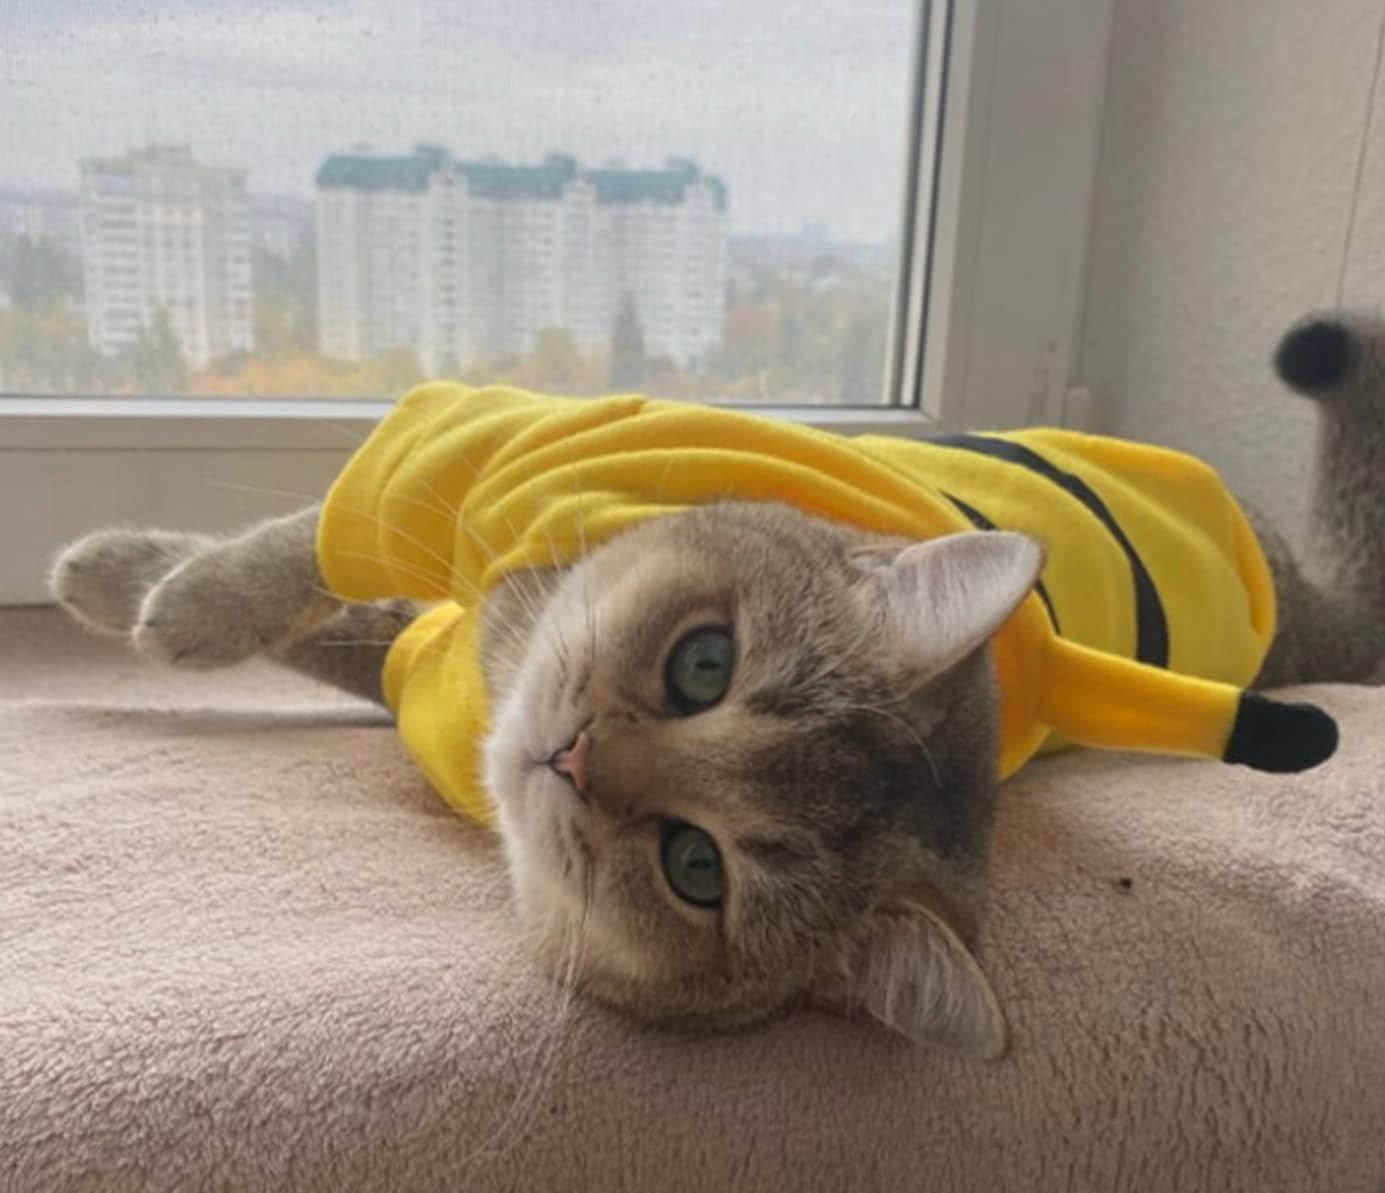 PIKACHU Dog Cat Outfit | PUPPY DOG or Cat Pokemon Pikachu Costume | Adorable!